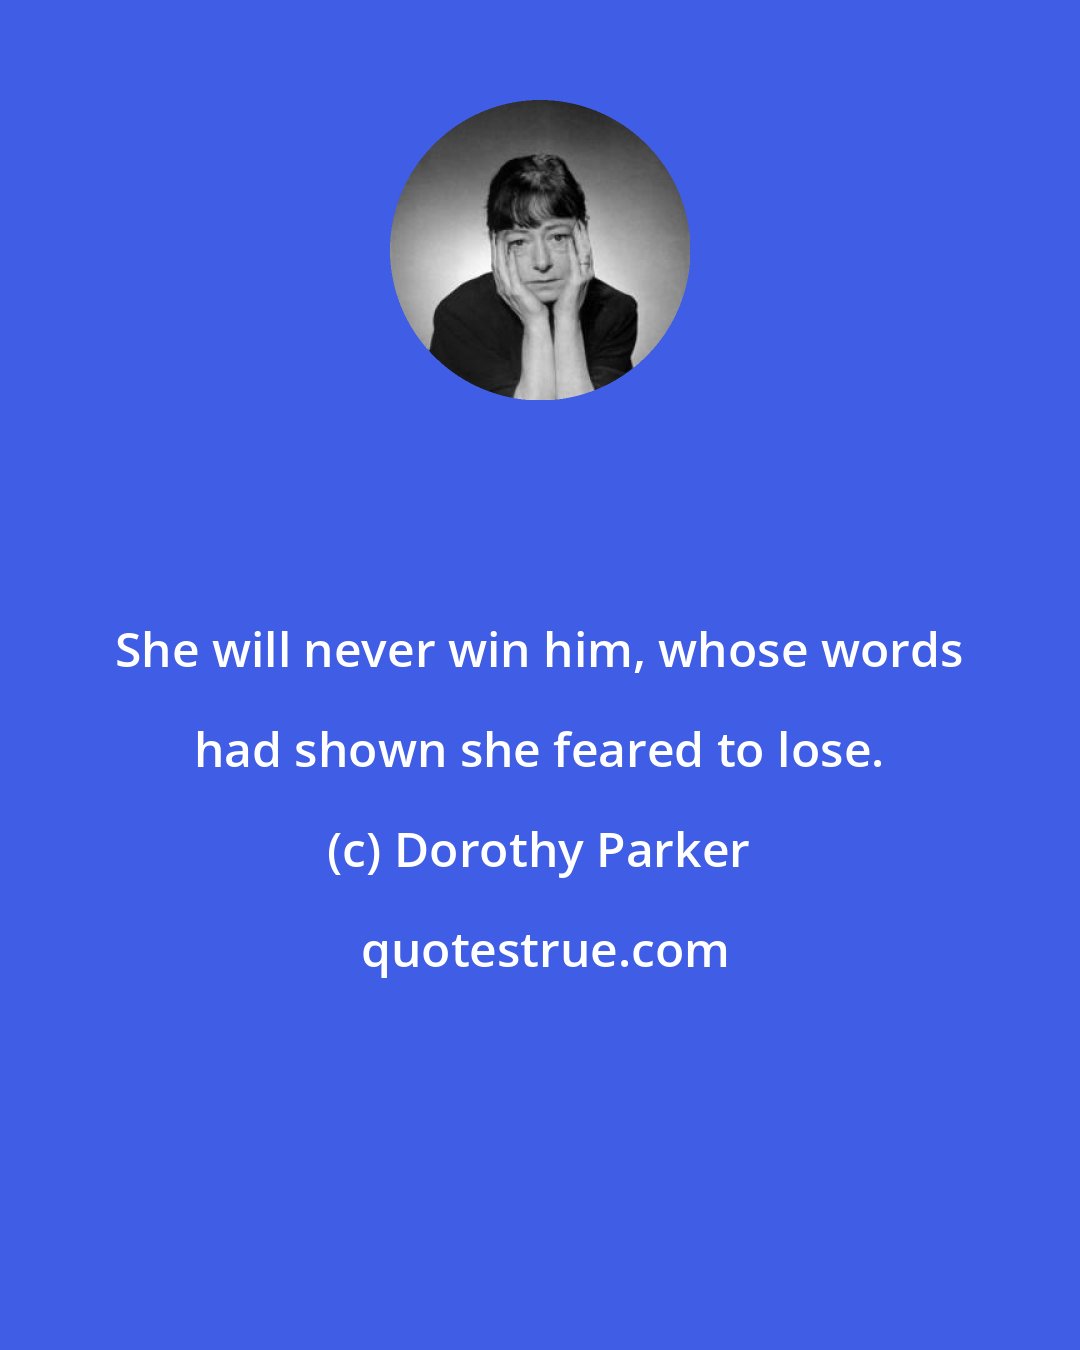 Dorothy Parker: She will never win him, whose words had shown she feared to lose.